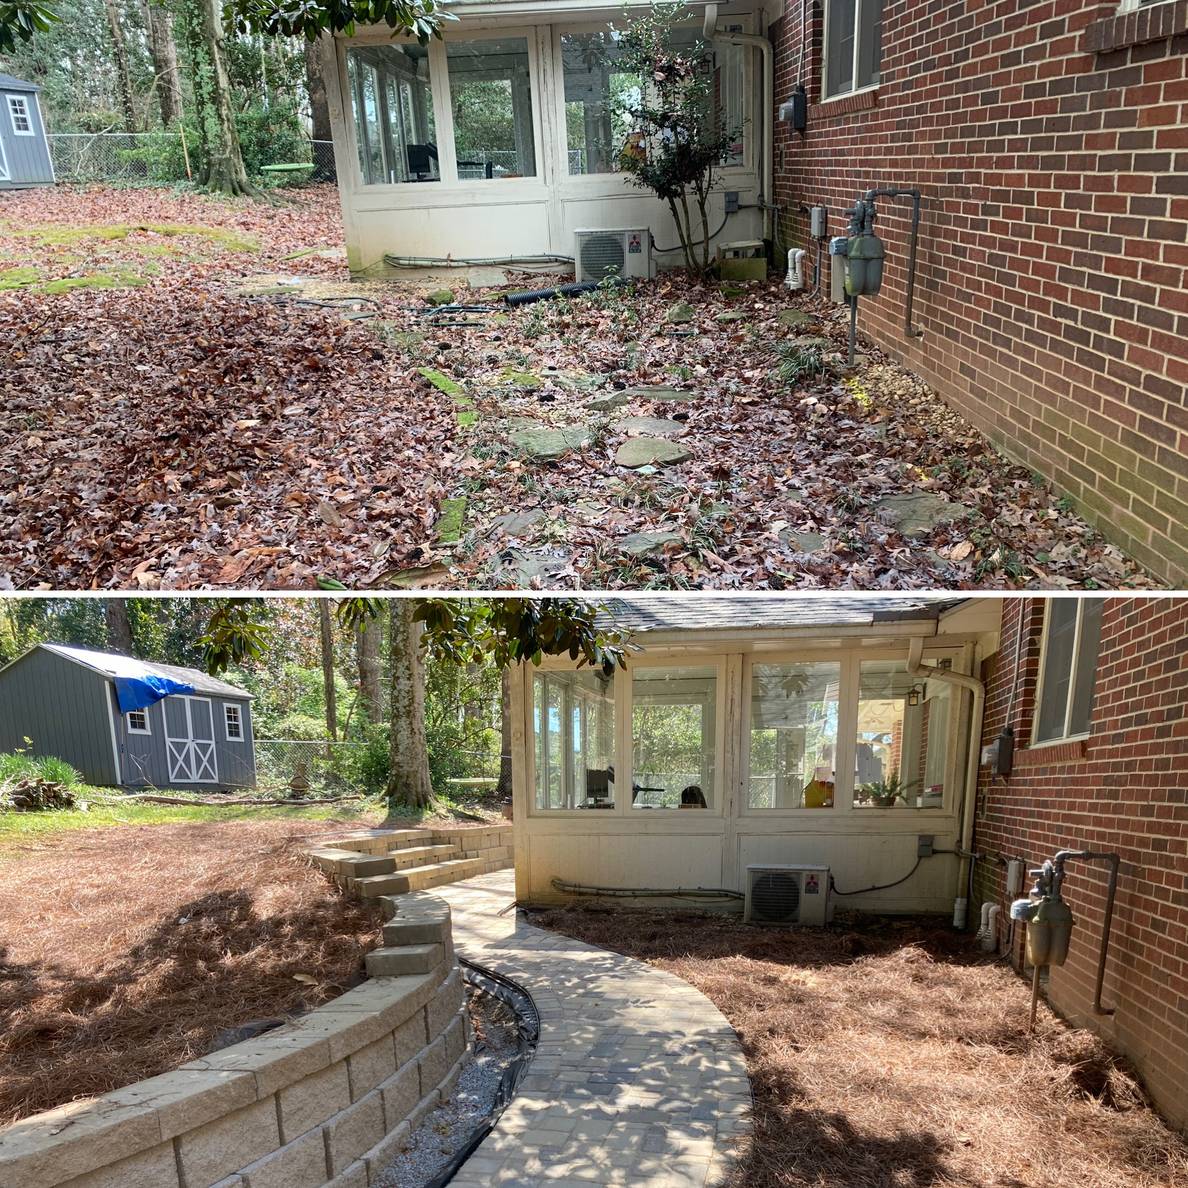 Before and After photos with a sun porch in the background. In the Before photo, a leaf littered area is in the foreground. In the after photo, a paver walkway leads towards and around the sun porch with a wall on one side and a planting bed on the other.